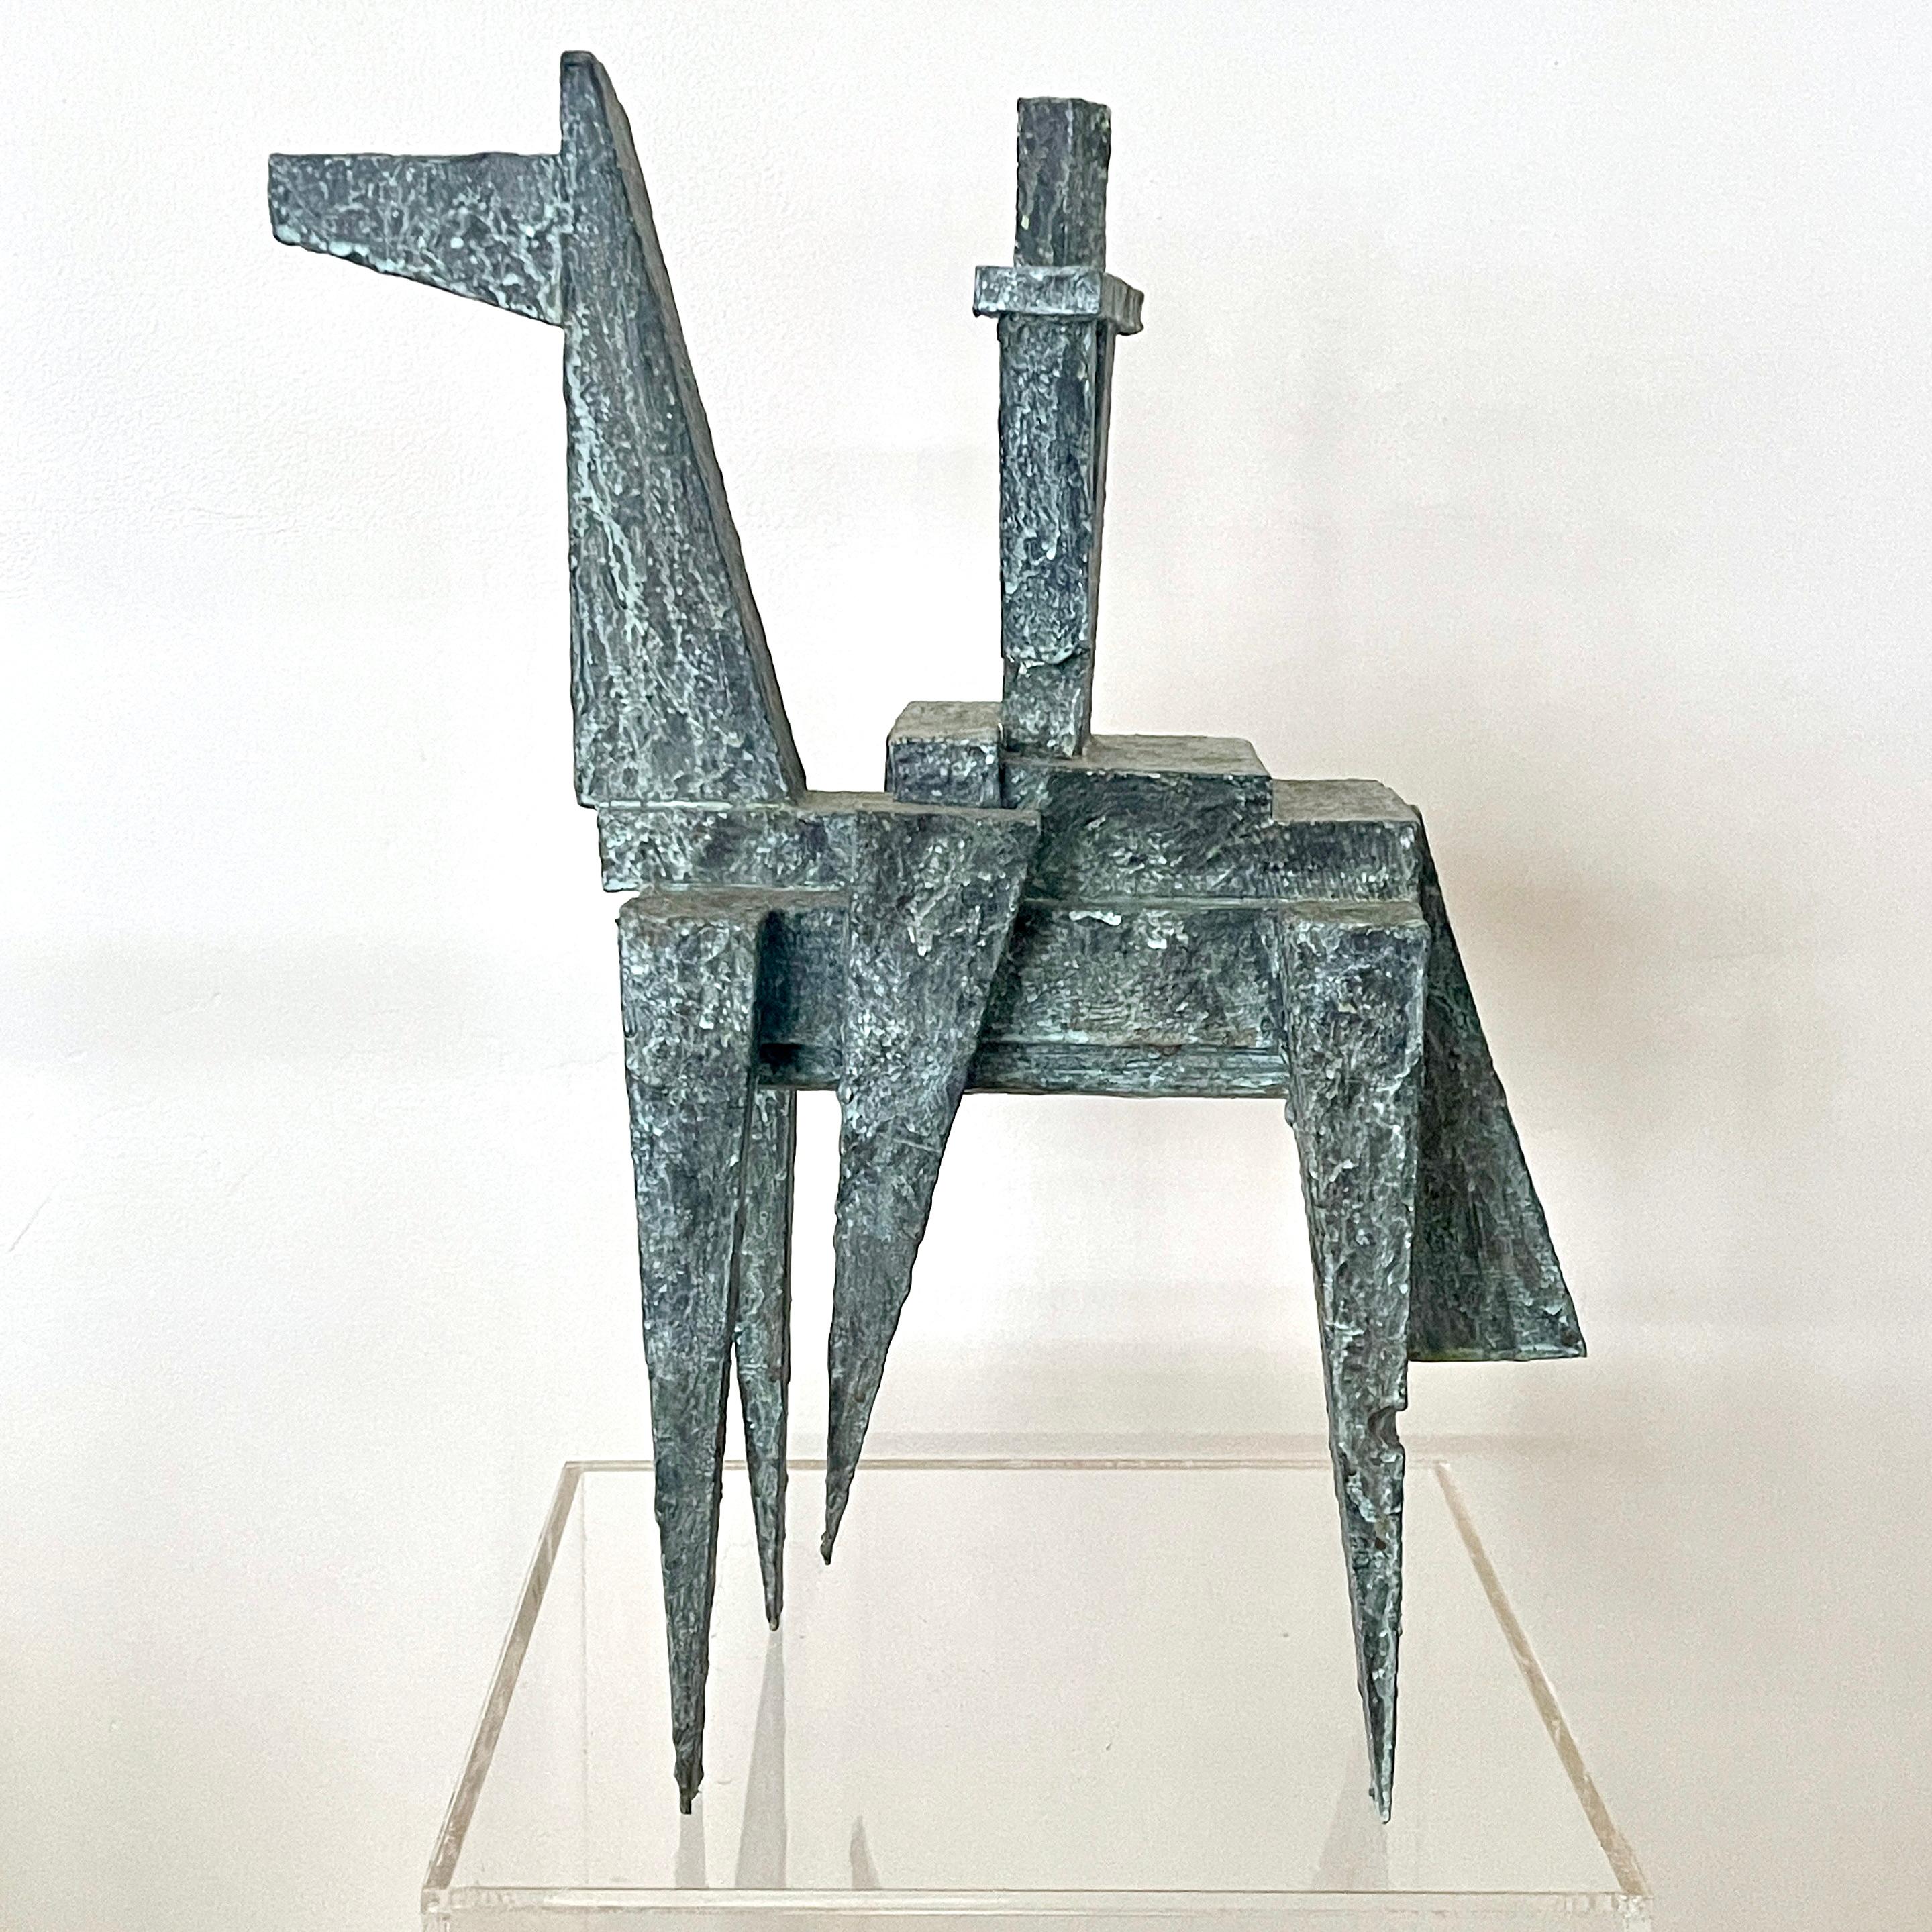 Modernist Cubist Sculpture by Bill Low with Weathered Bronze Finish For Sale 6